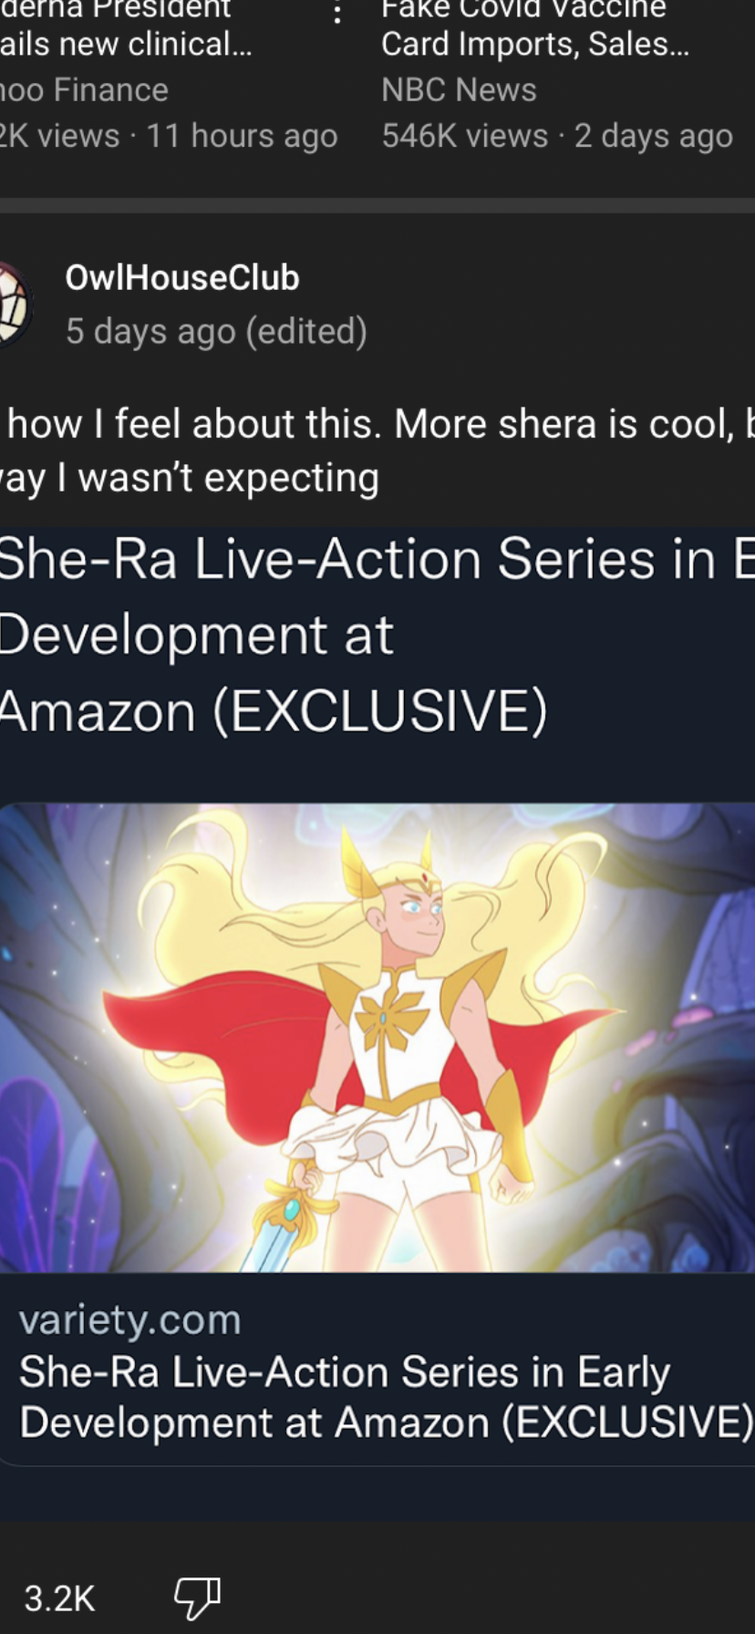 The princess of pandemic power: How the She-Ra reboot gave me a